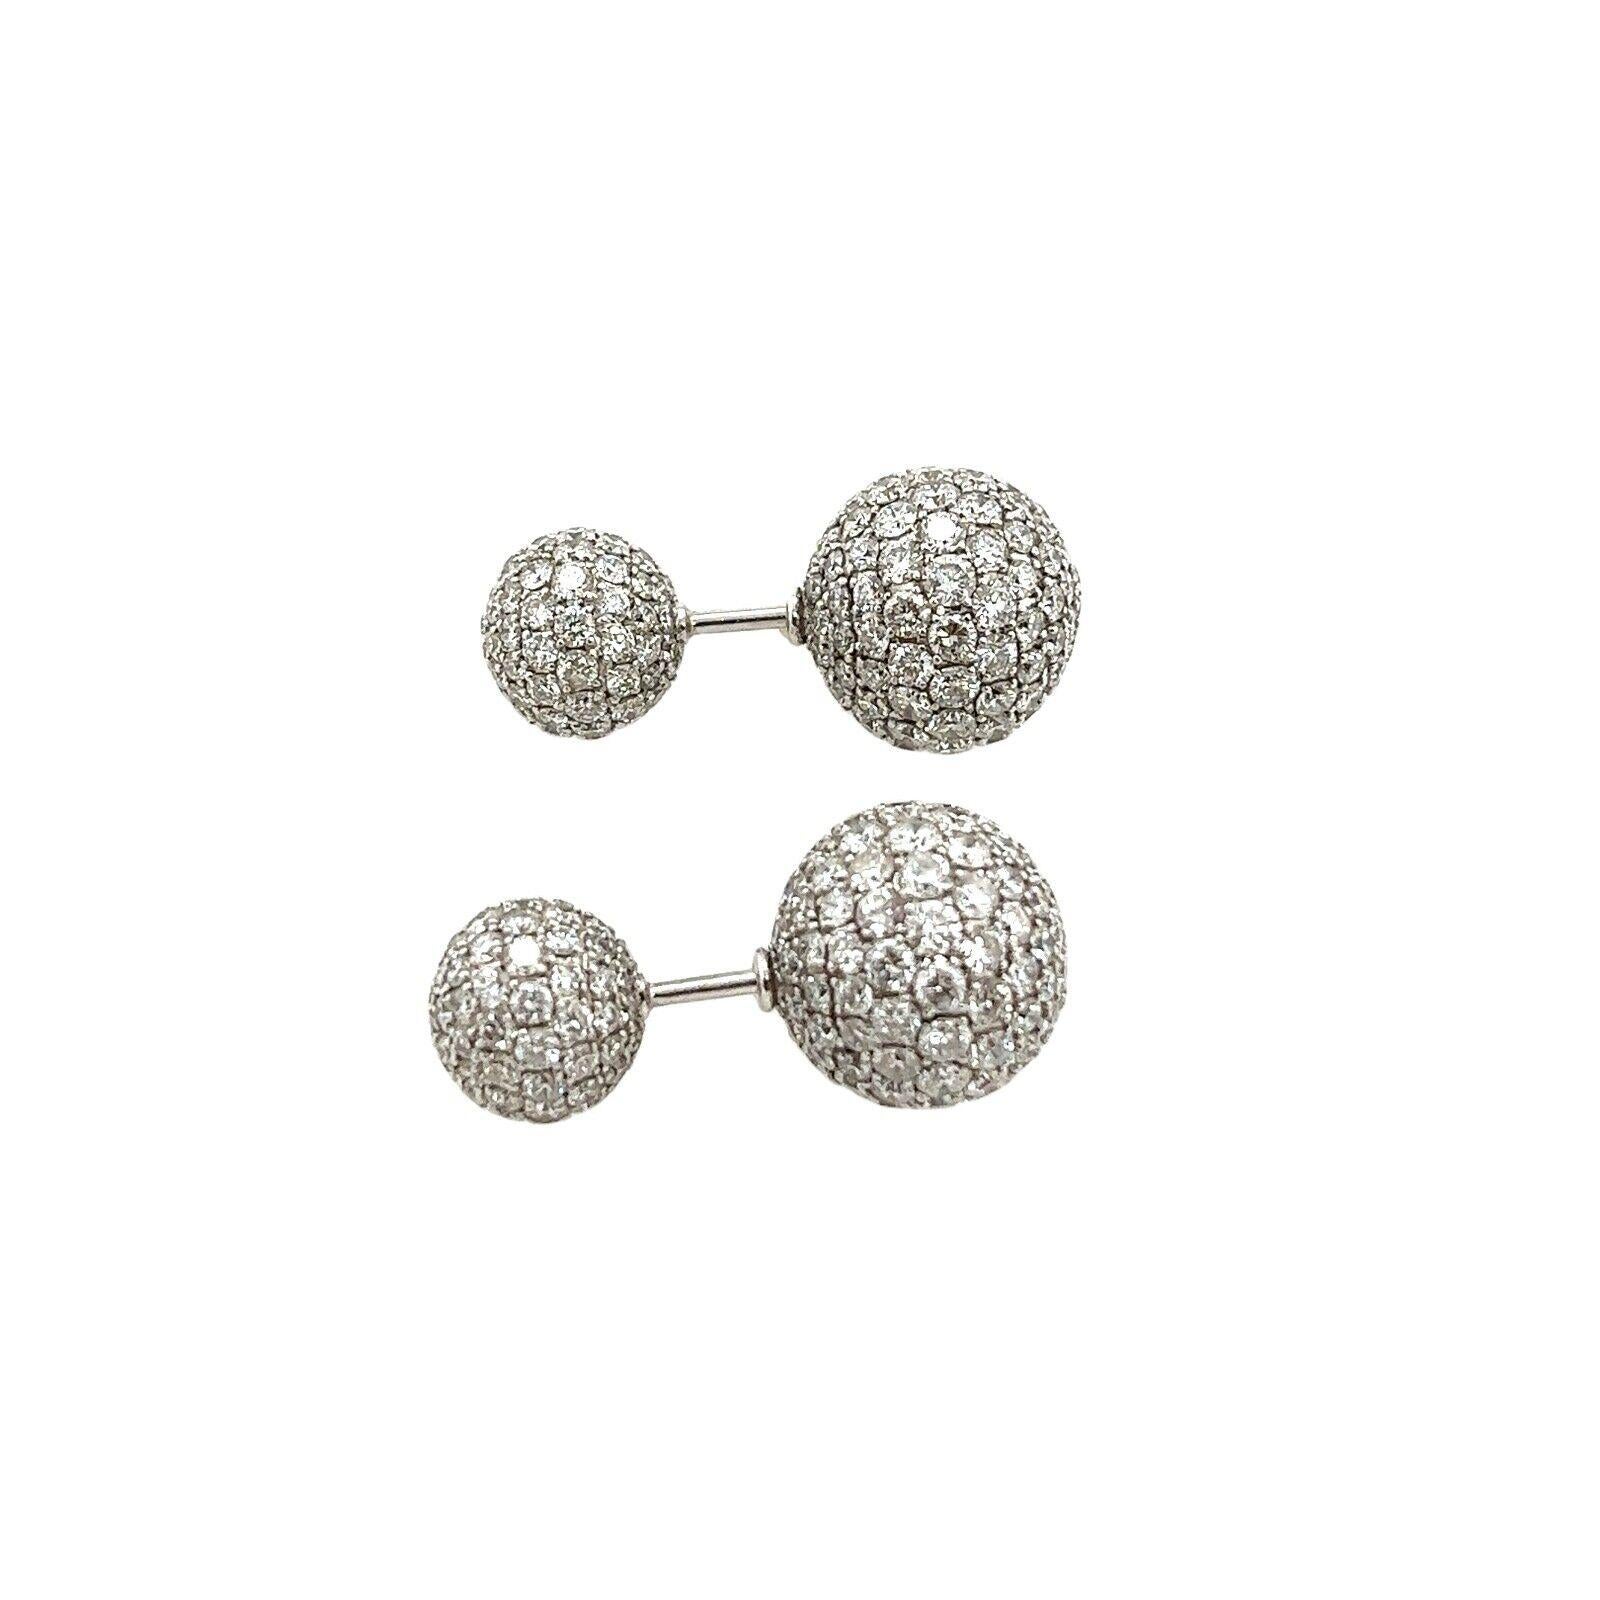 Make a dazzling move with these diamond ball stud earrings 
set in 18ct white gold with 5.36ct round brilliant cut diamonds in a pave setting. Different-sized ball studs make the earrings reversible and versatile to wear with any outfit.
(tested as